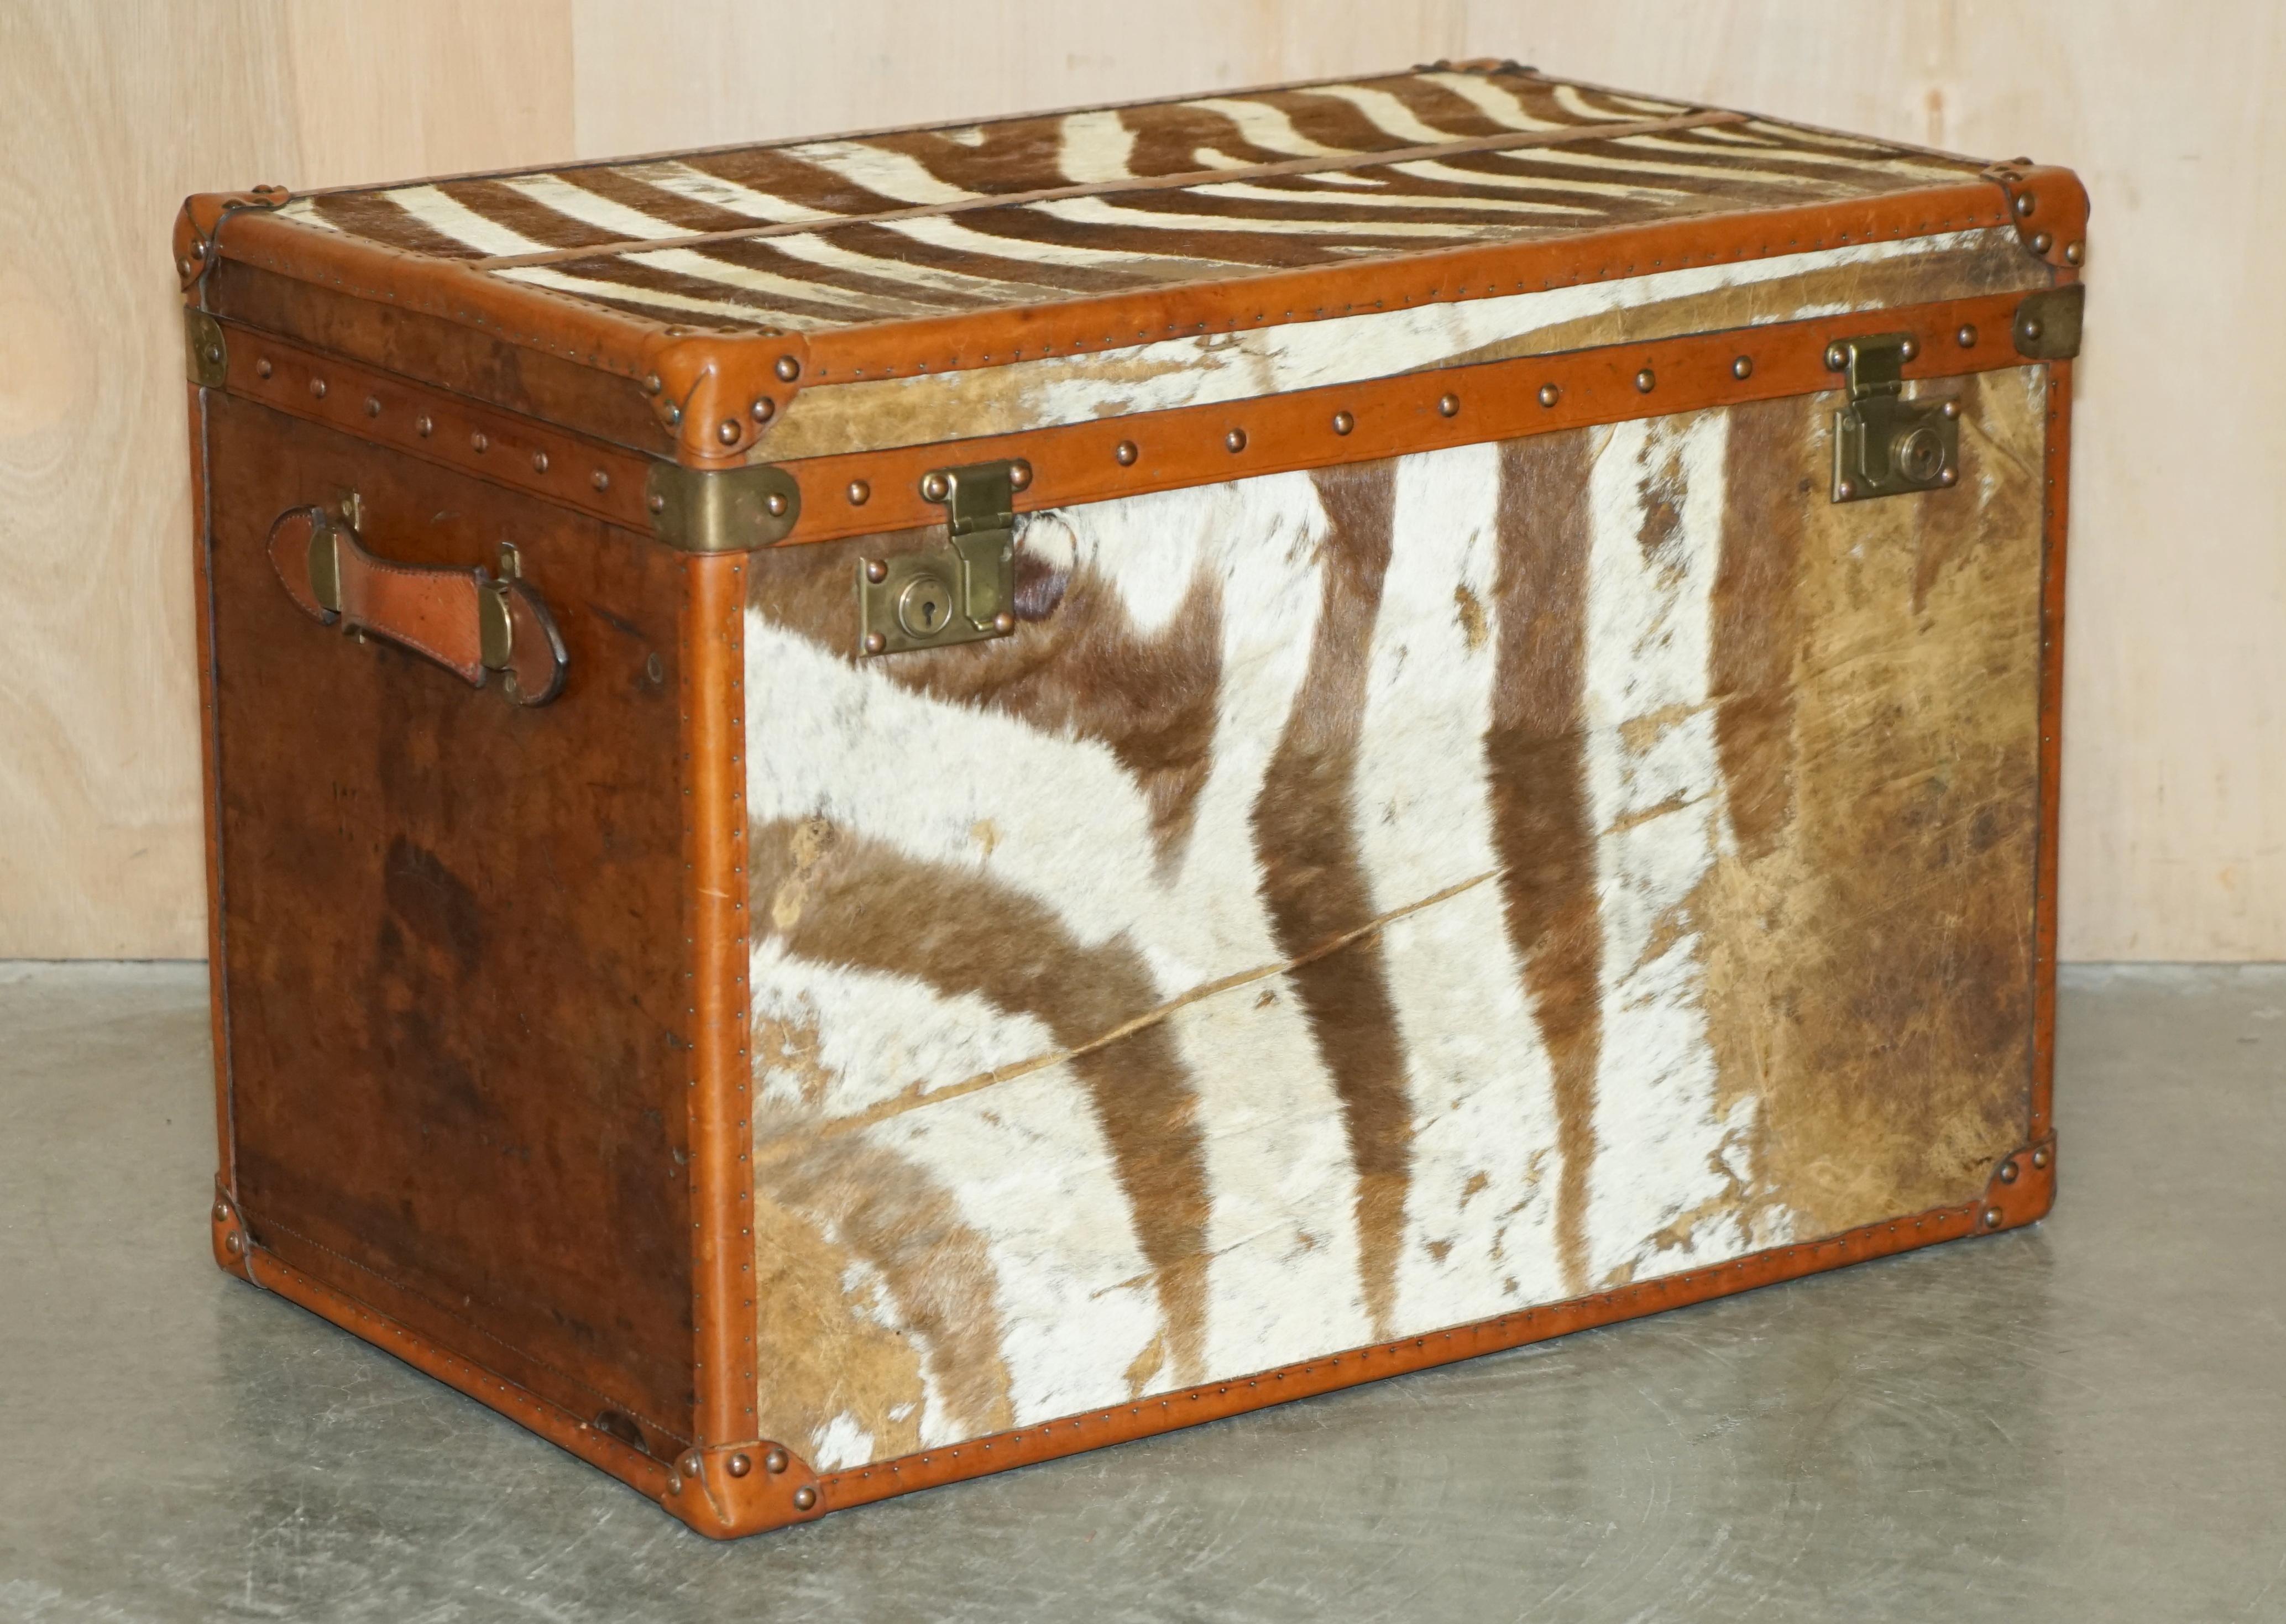 PAiR OF ANTIQUE ZEBRA SKIN & LEATHER UPHOLSTERED STEAMER TRUNKS CHESTS TABLES 7